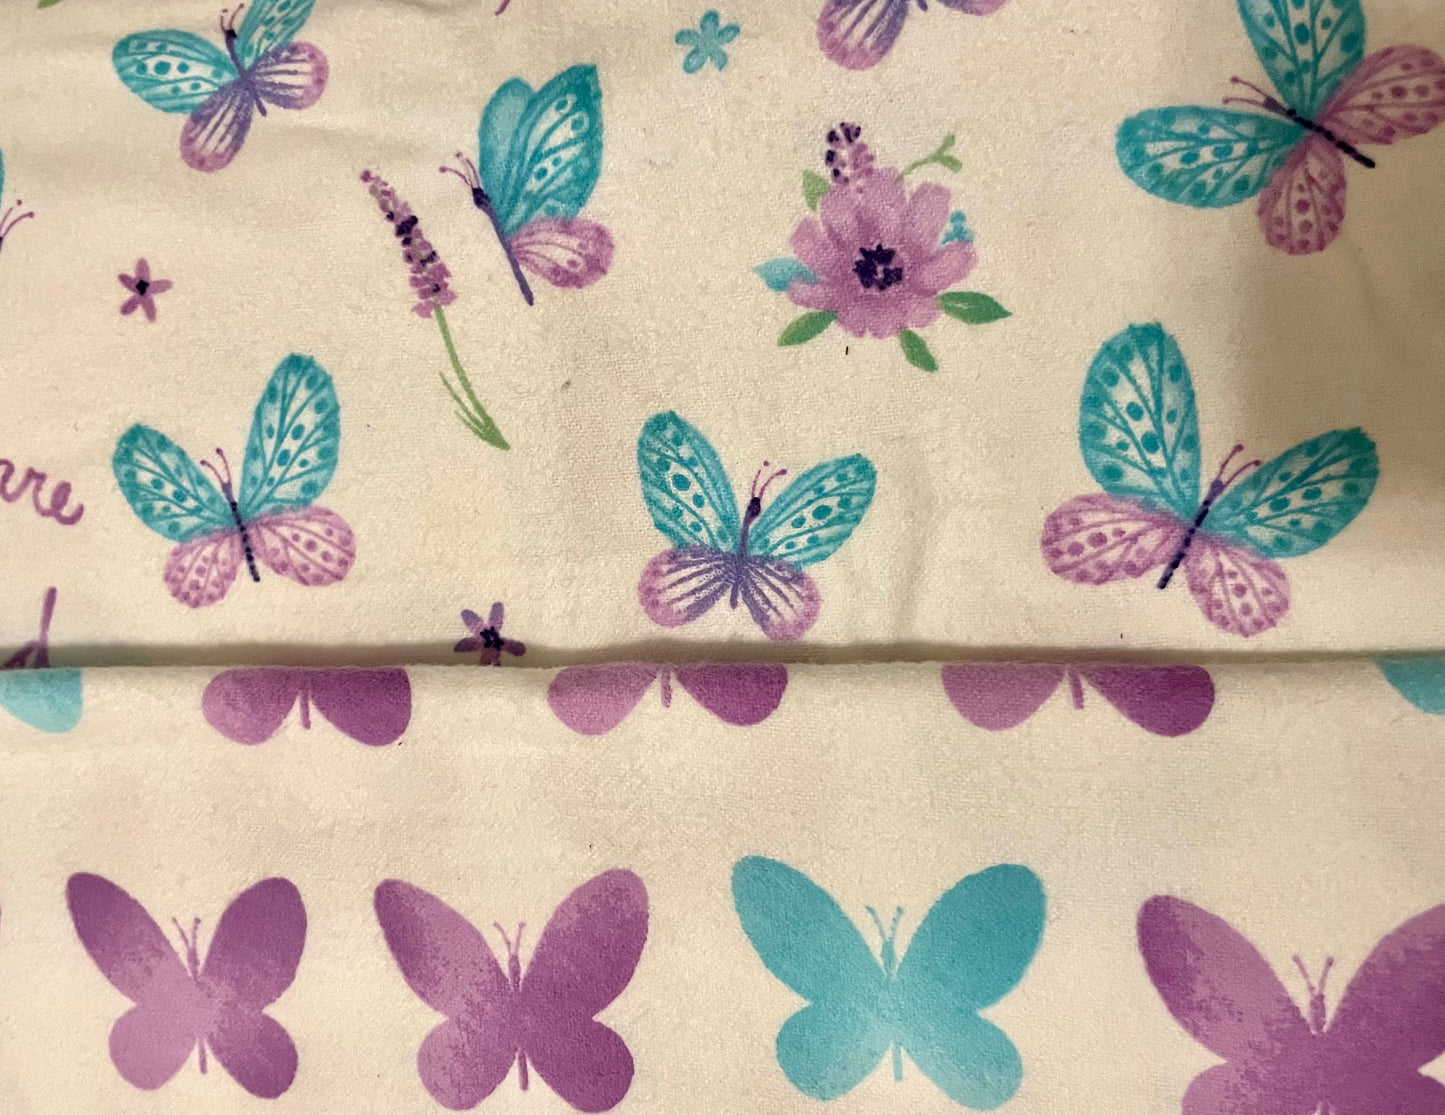 Beautiful “You Are Loved” purple and blue butterfly blanket